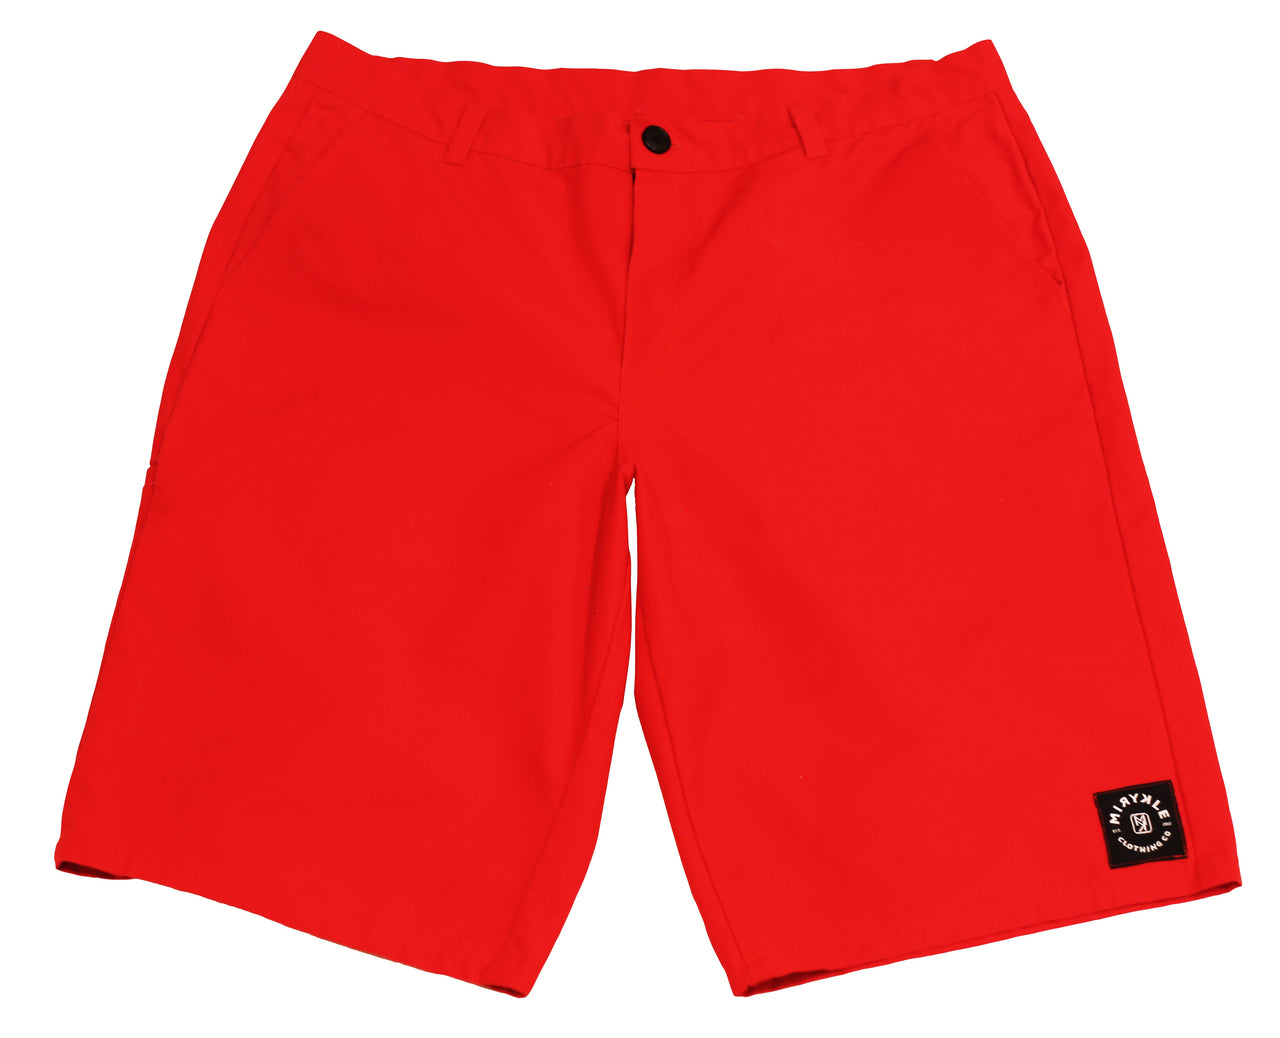 Men’s Ready To Work Shorts With Multi-Use Pocket